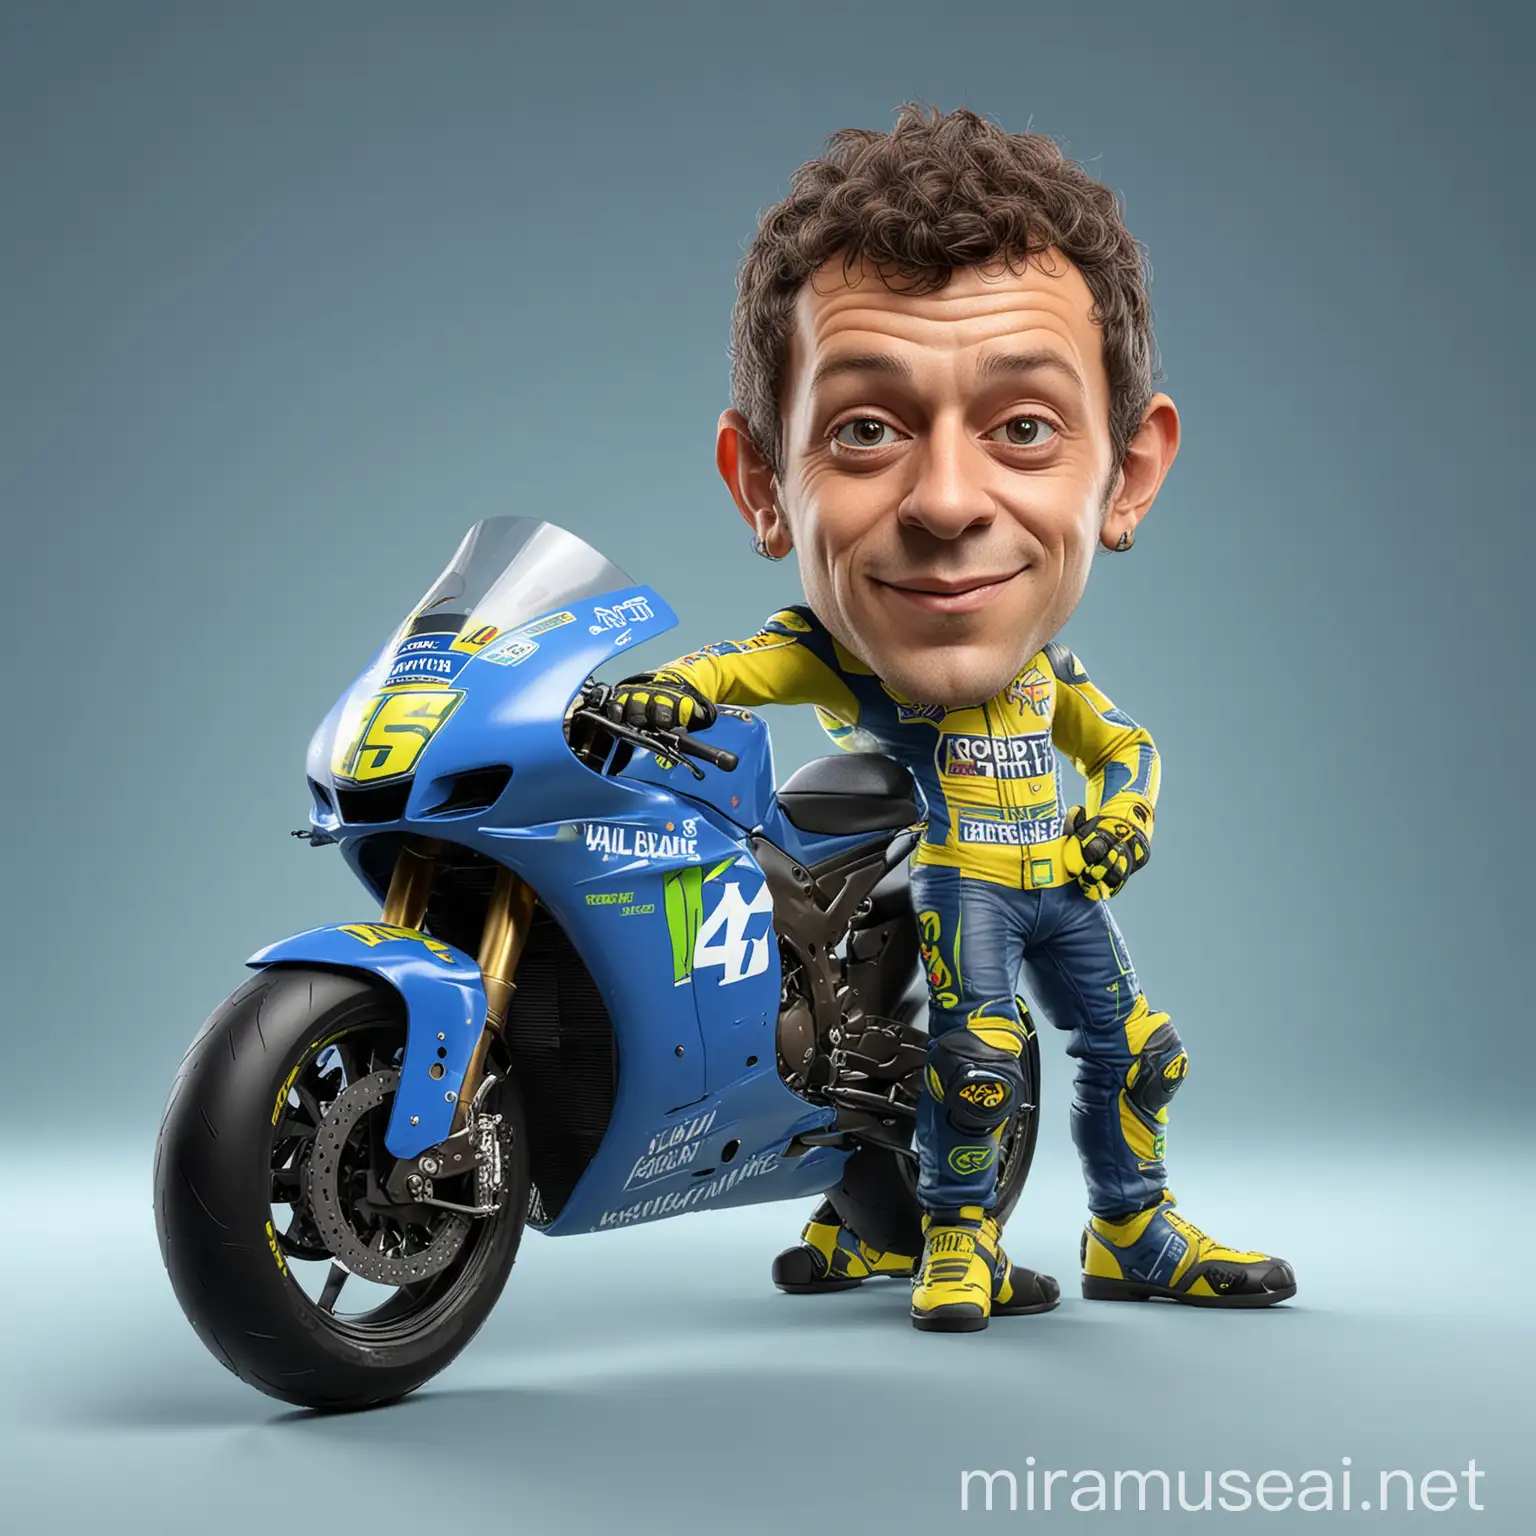 Caricature 3D Realistic Cartoon of Valentino Rossi with GP Motorbike